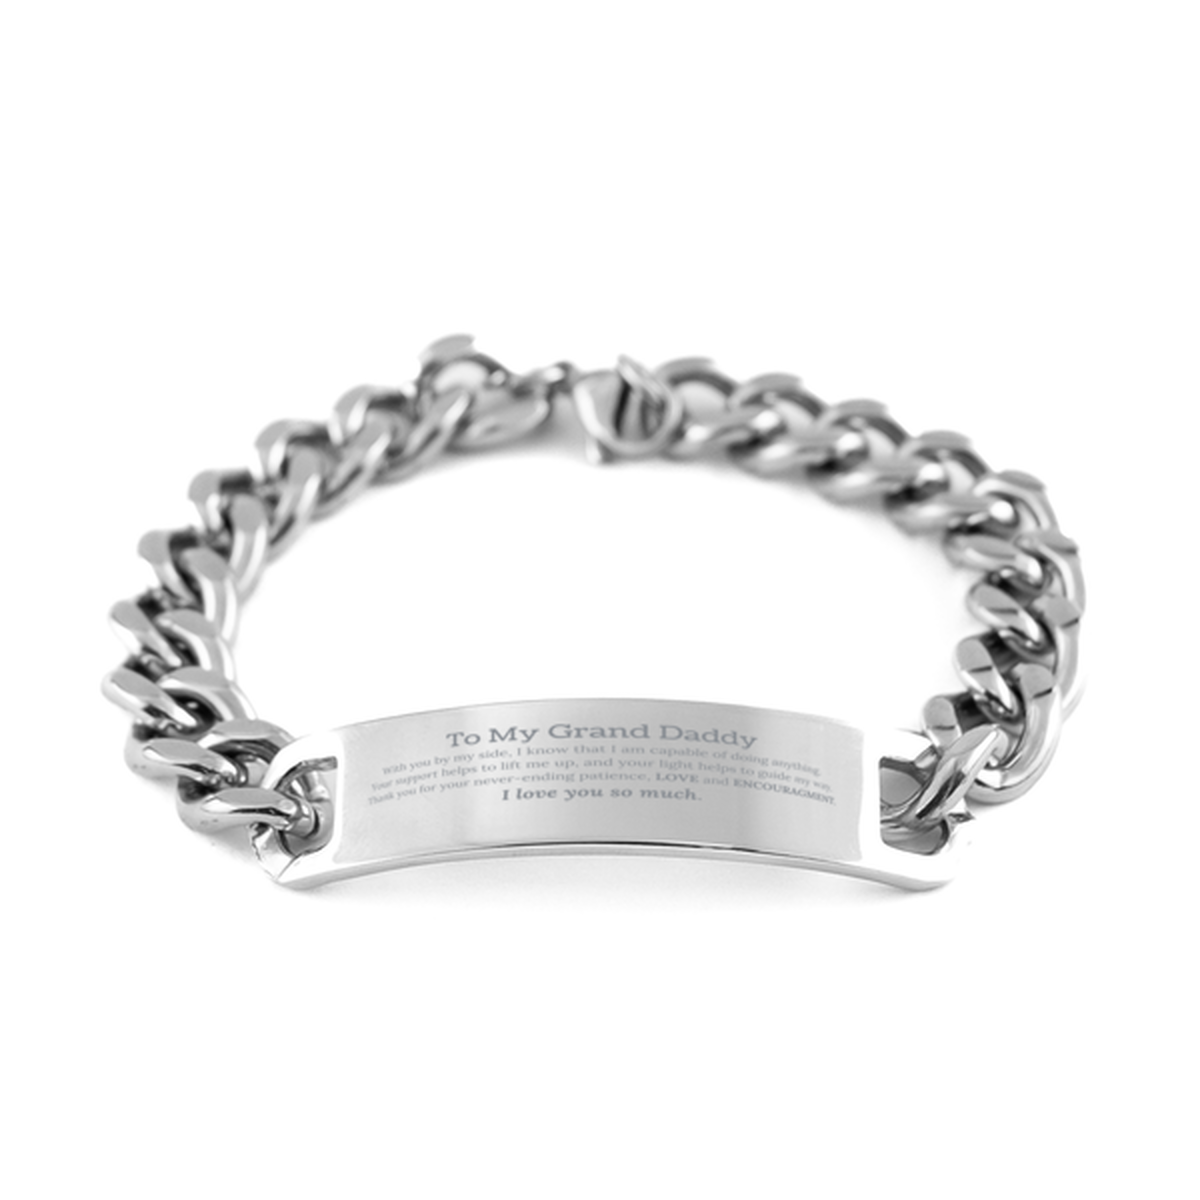 Appreciation Grand Daddy Cuban Chain Stainless Steel Bracelet Gifts, To My Grand Daddy Birthday Christmas Wedding Keepsake Gifts for Grand Daddy With you by my side, I know that I am capable of doing anything. I love you so much